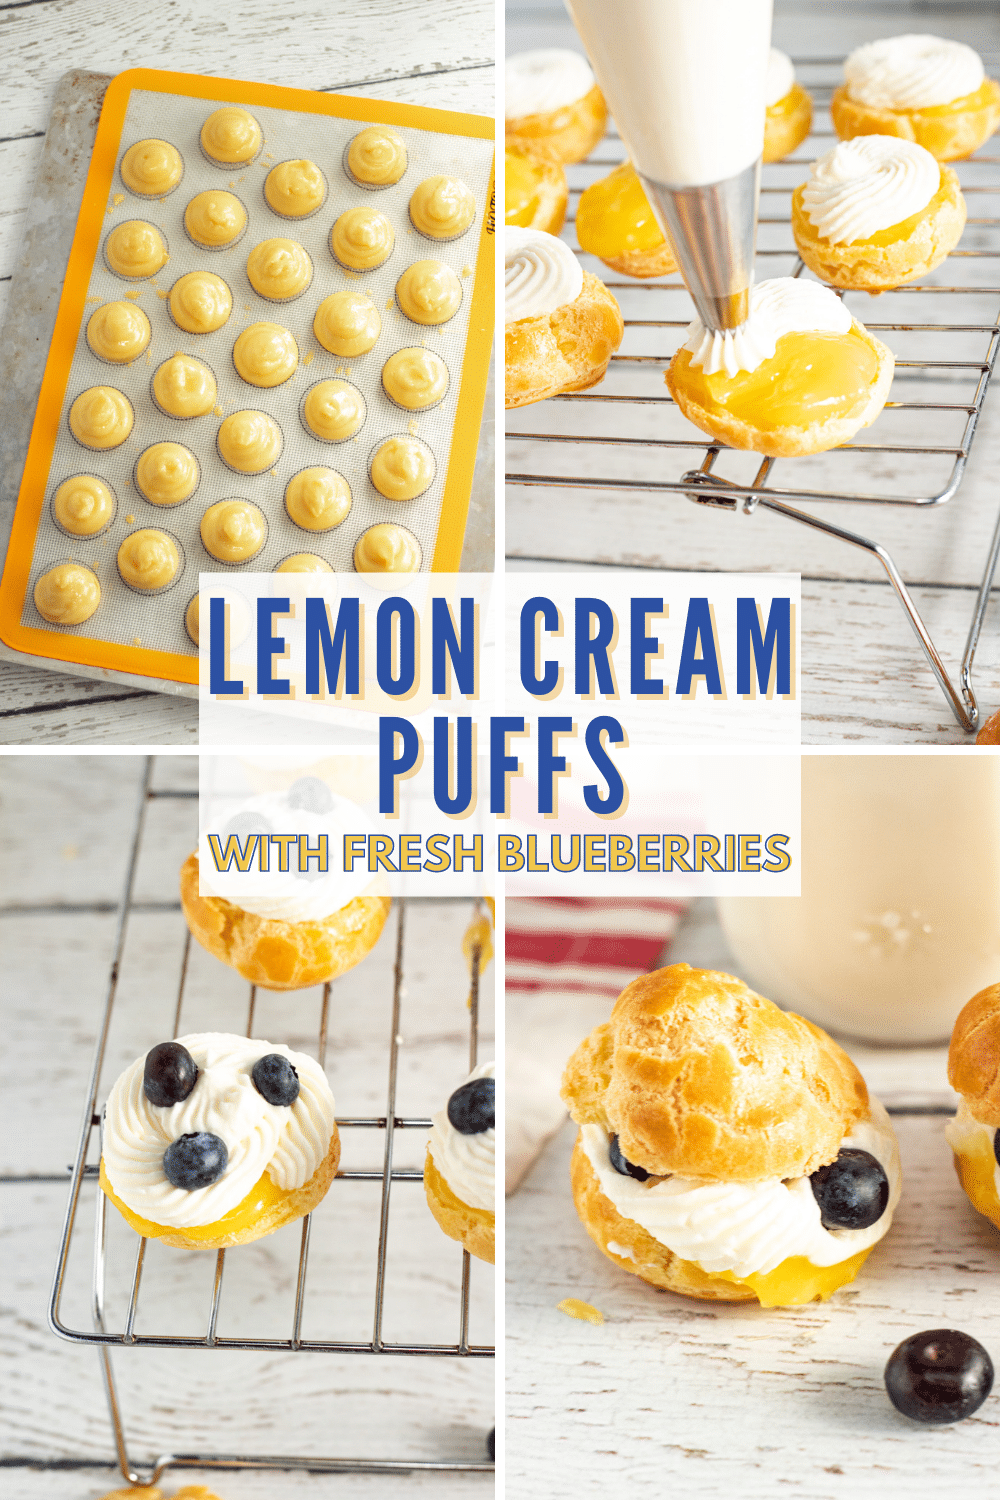 These Lemon Cream Puffs With Fresh Blueberries are light and airy, with a tart and sweet lemon filling and fresh blueberries on top. #lemoncreampuffs #blueberries #creampuffs #dessertrecipe via @wondermomwannab